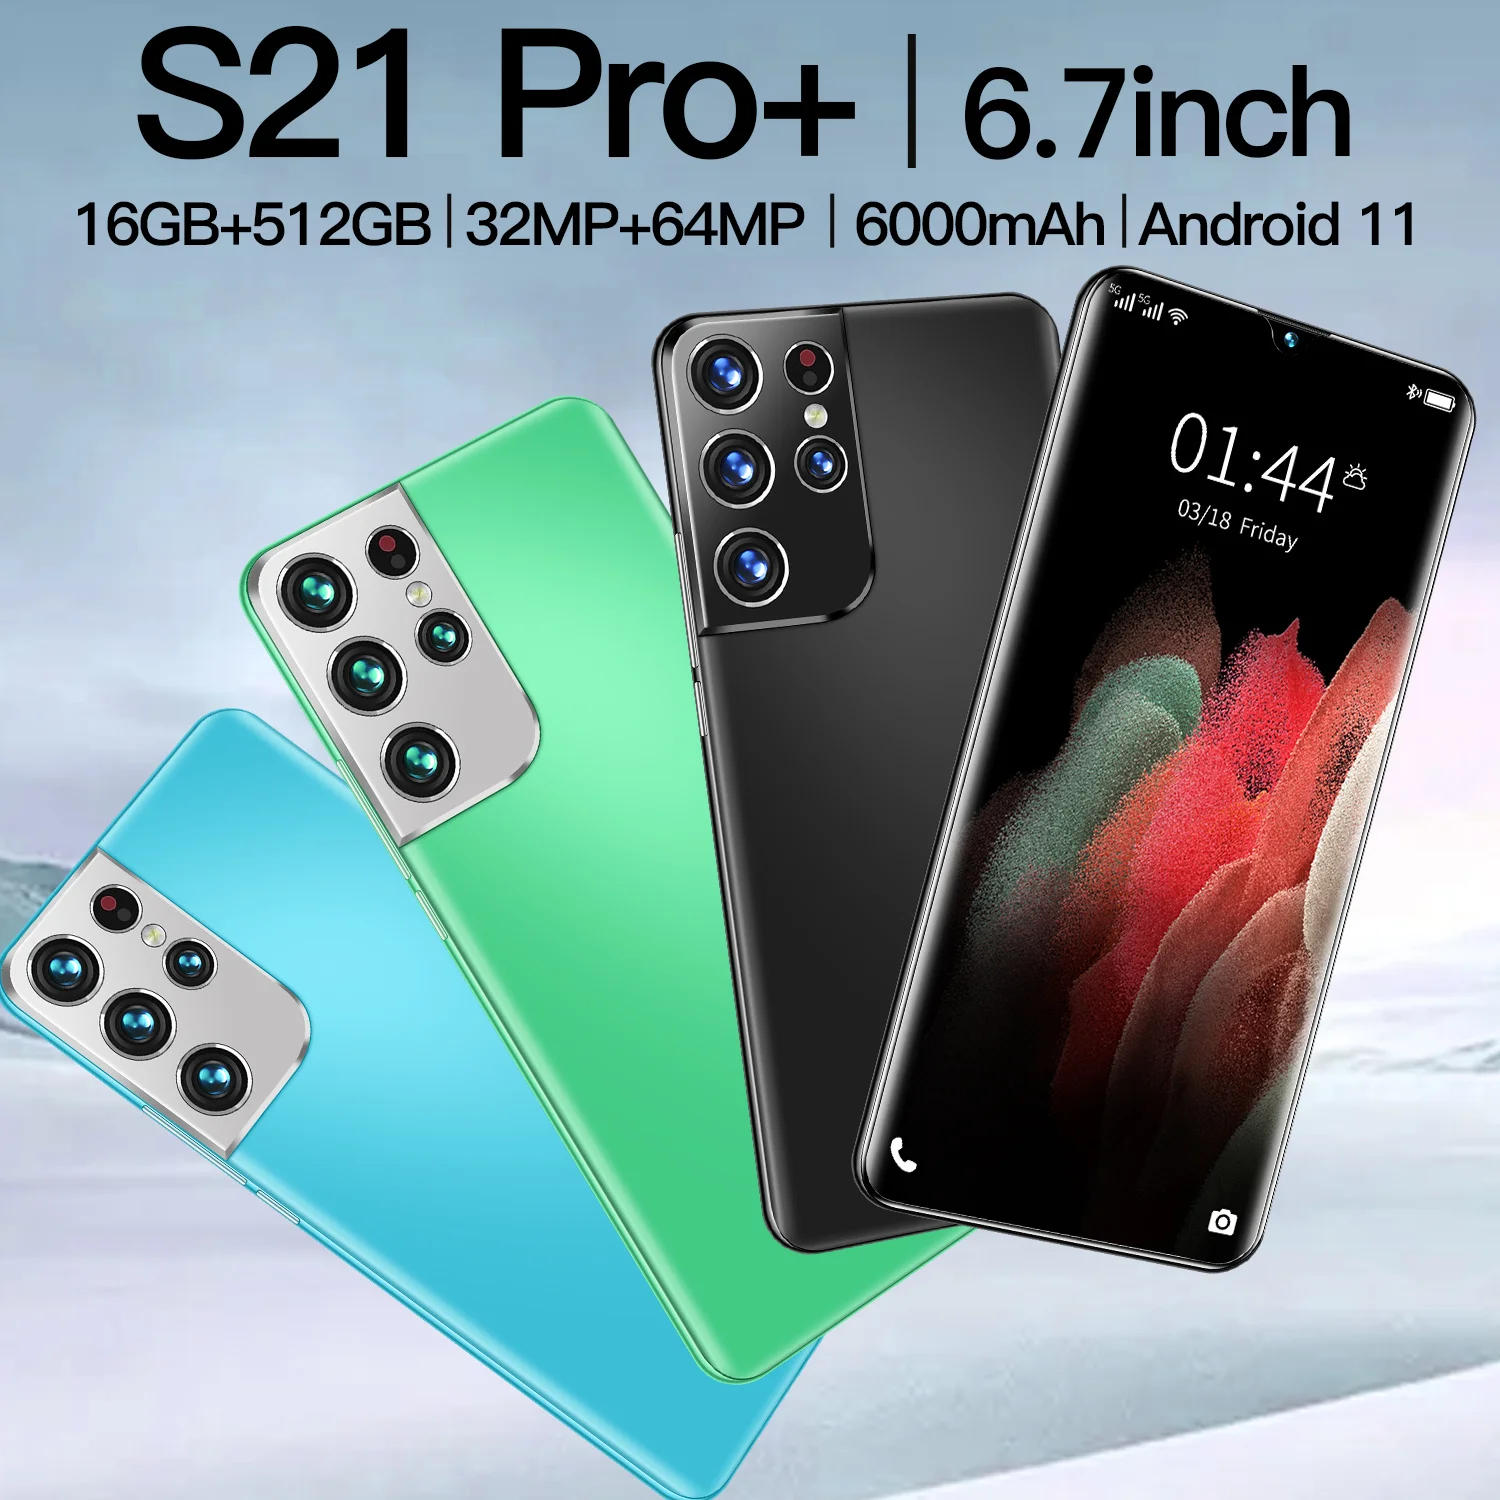 

2021Global Version S21 Pro+ Android 11 Smartphone 6.7-Inch 6000mAh Full Screen Deca Core 16GB 512GB 4G LTE 5G Network Cellphones